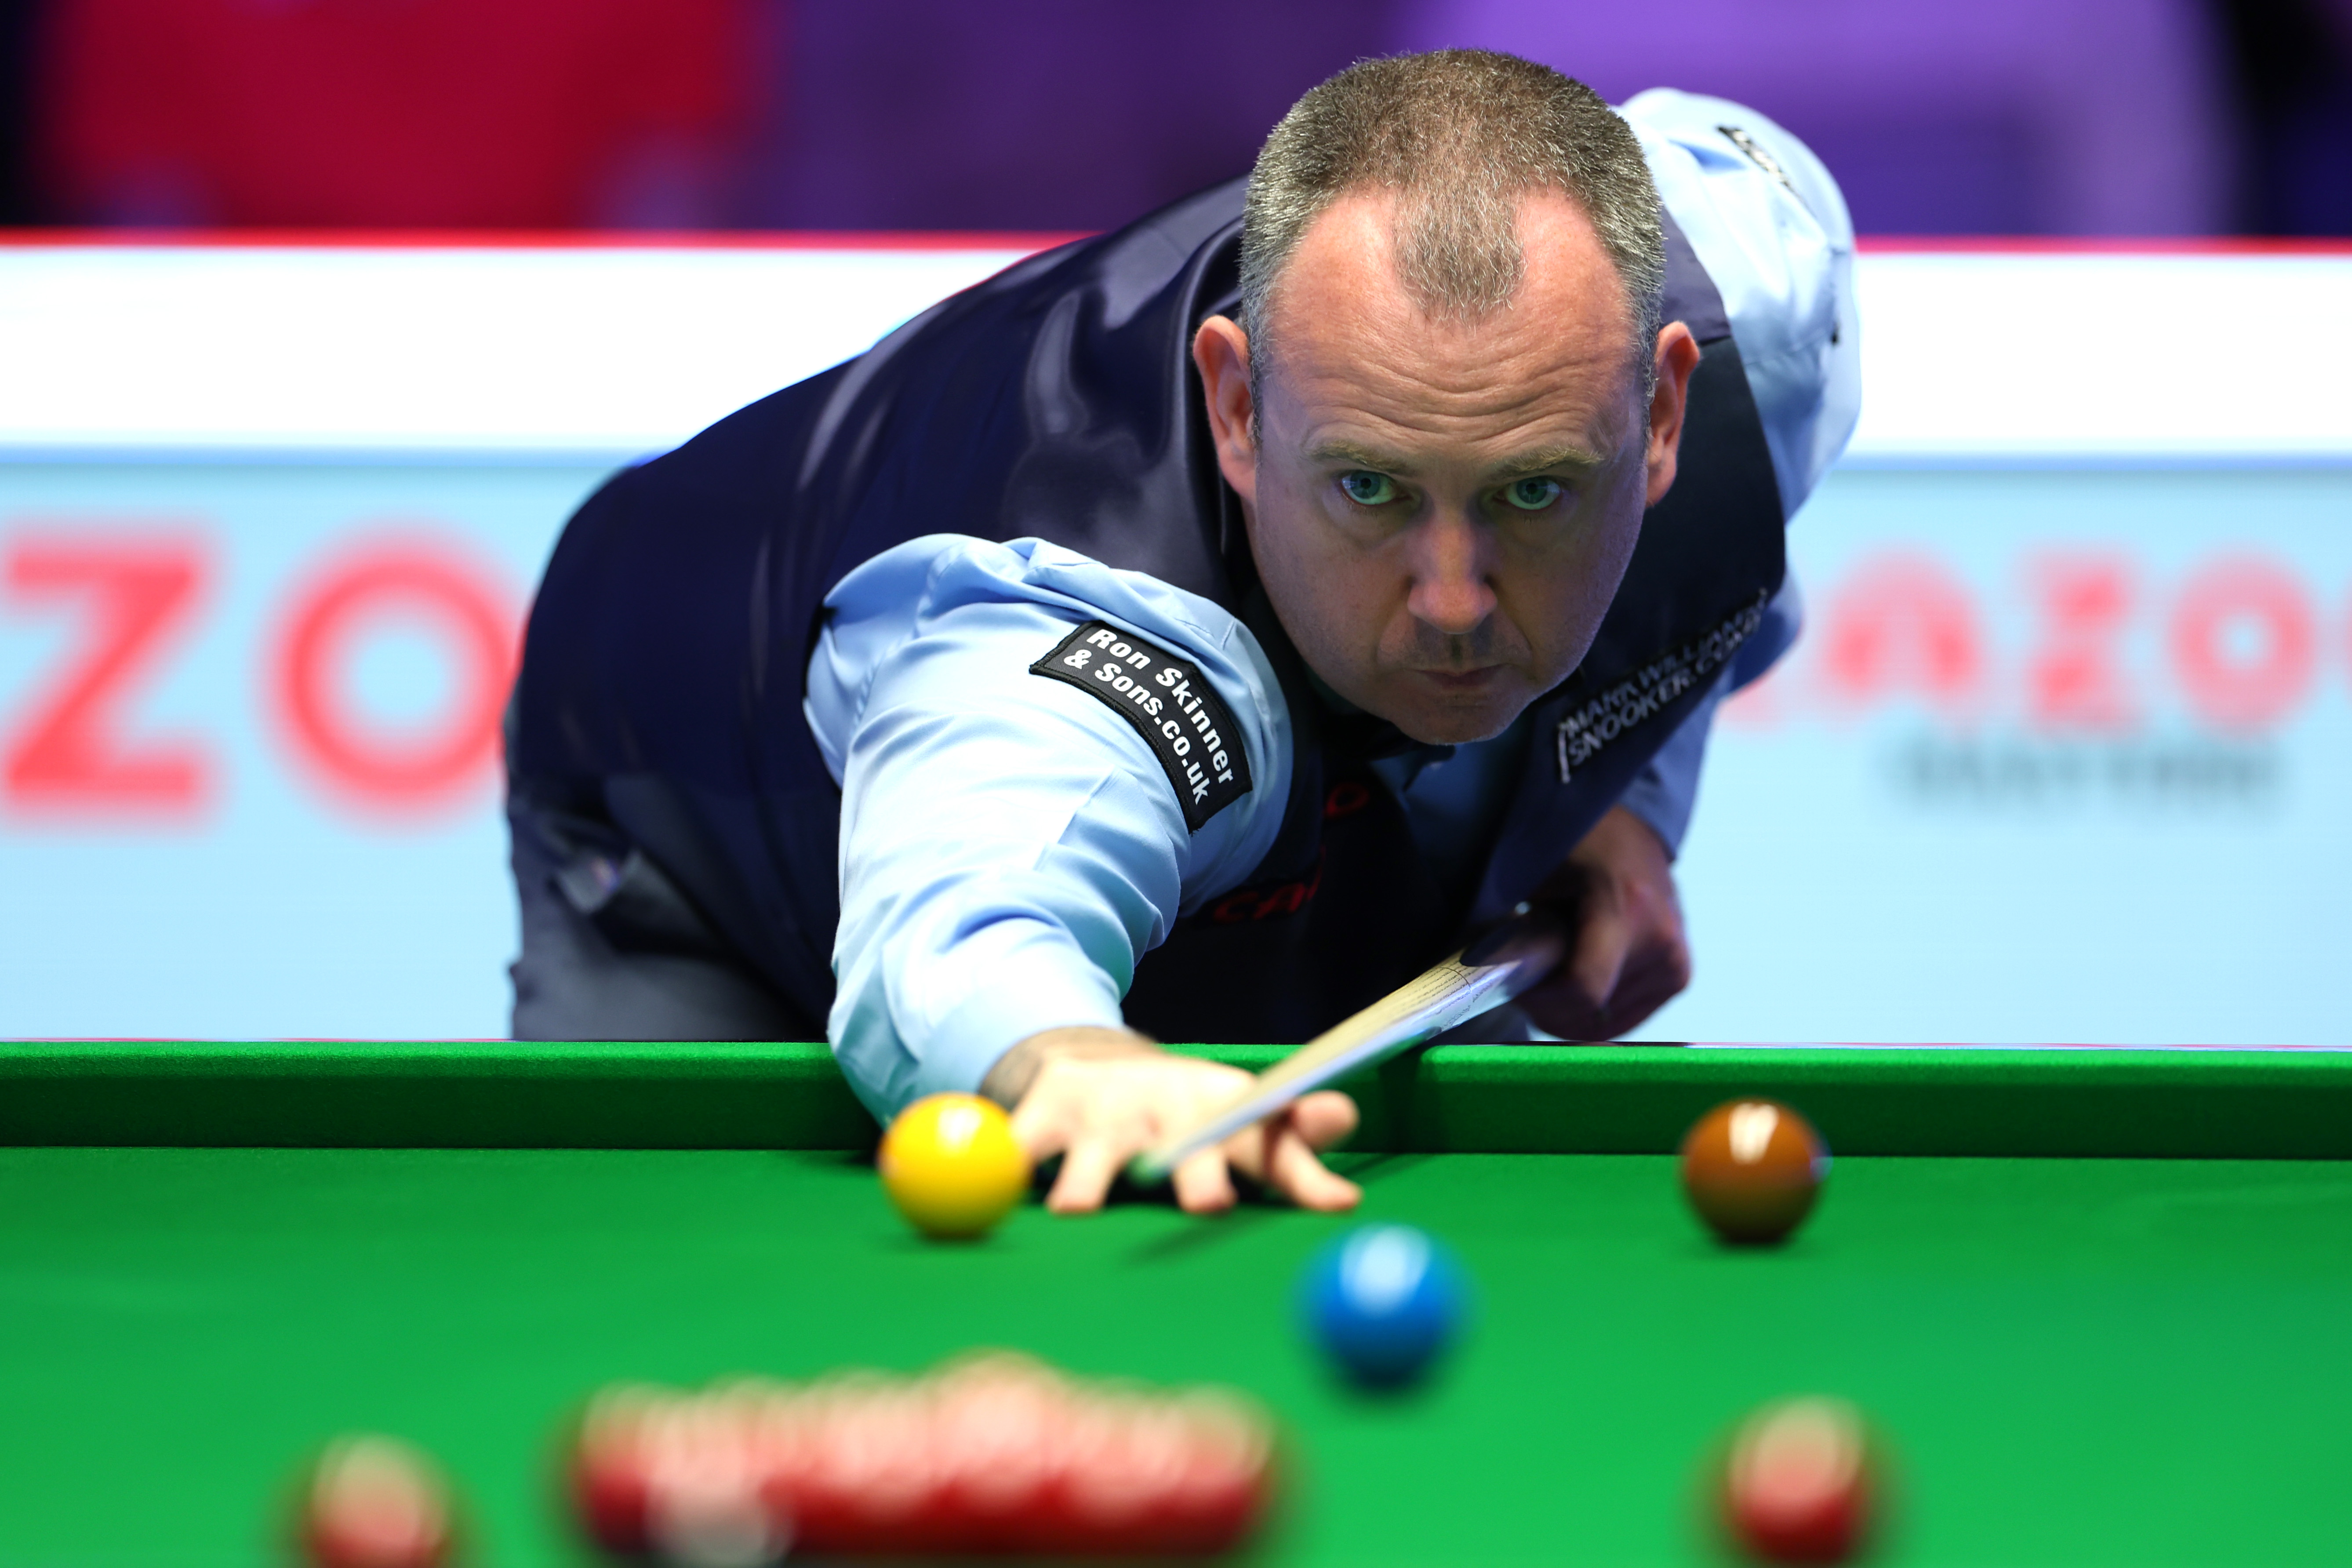 Masters Snooker 2023 how much do final tickets cost?